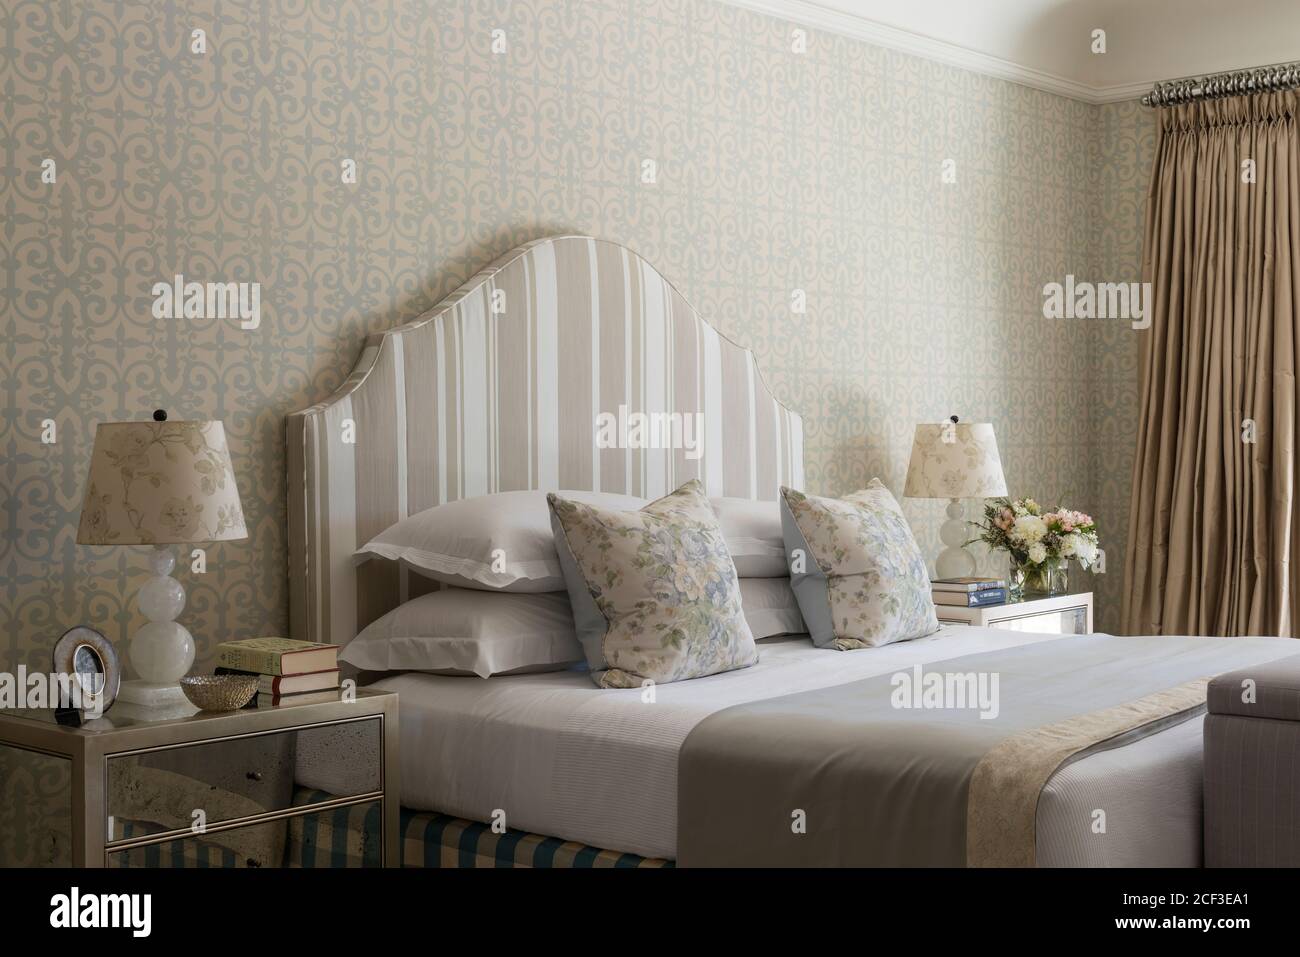 Bedroom with striped headboard Stock Photo